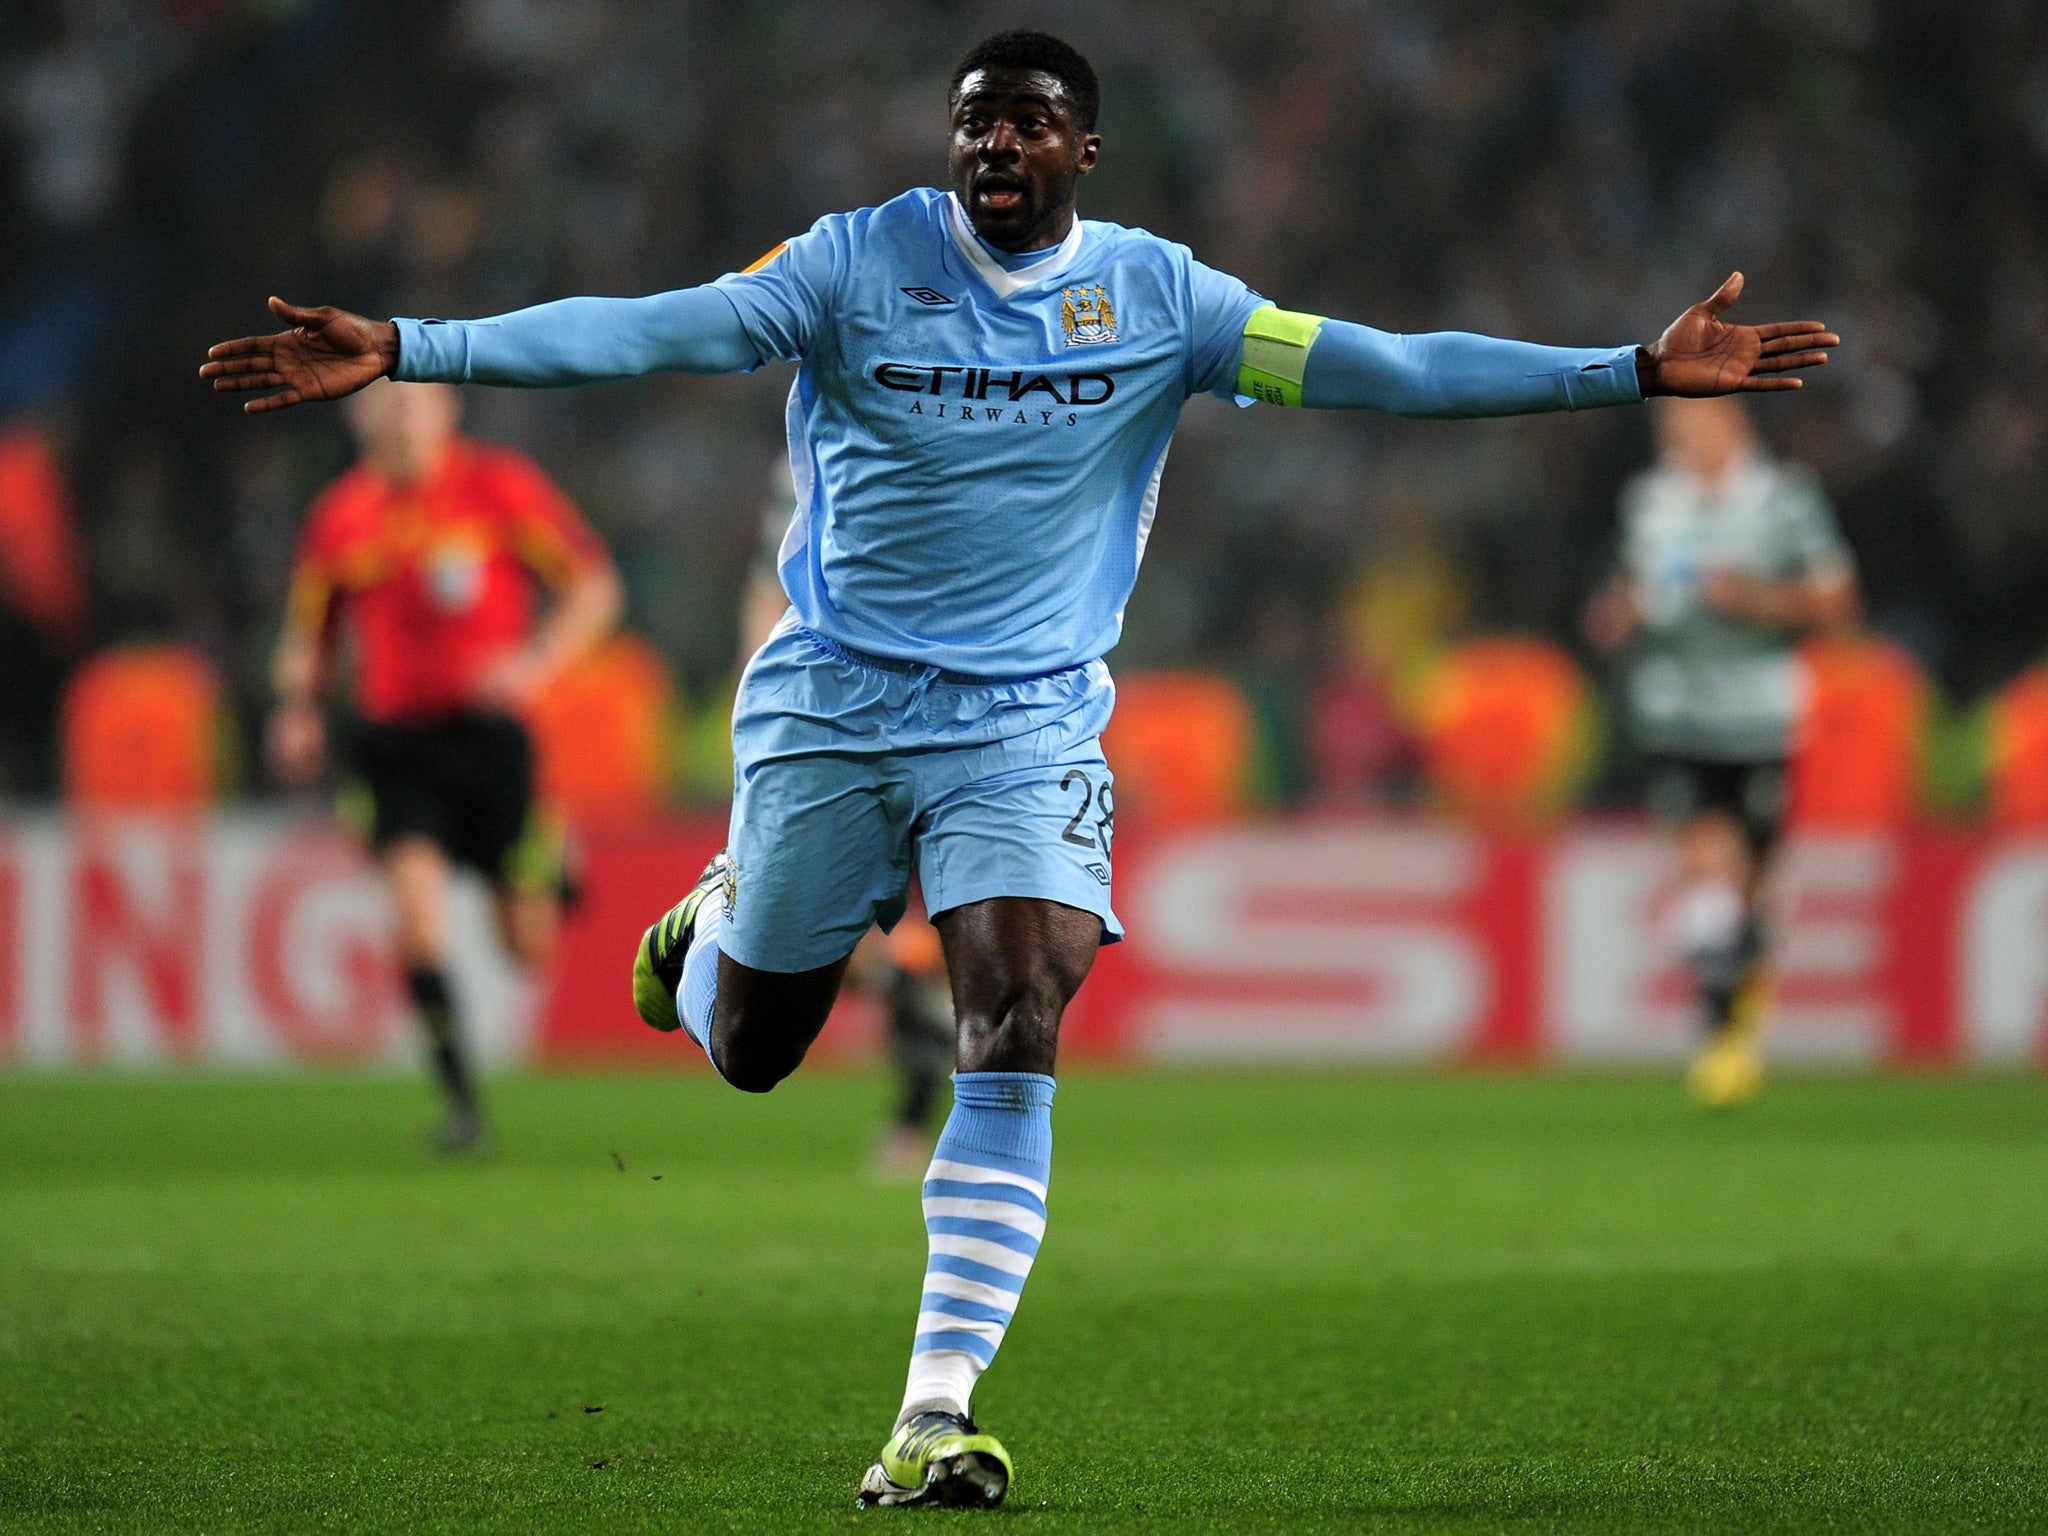 Kolo Toure looks set to join Liverpool on a free transfer after his contract expires with Manchester City